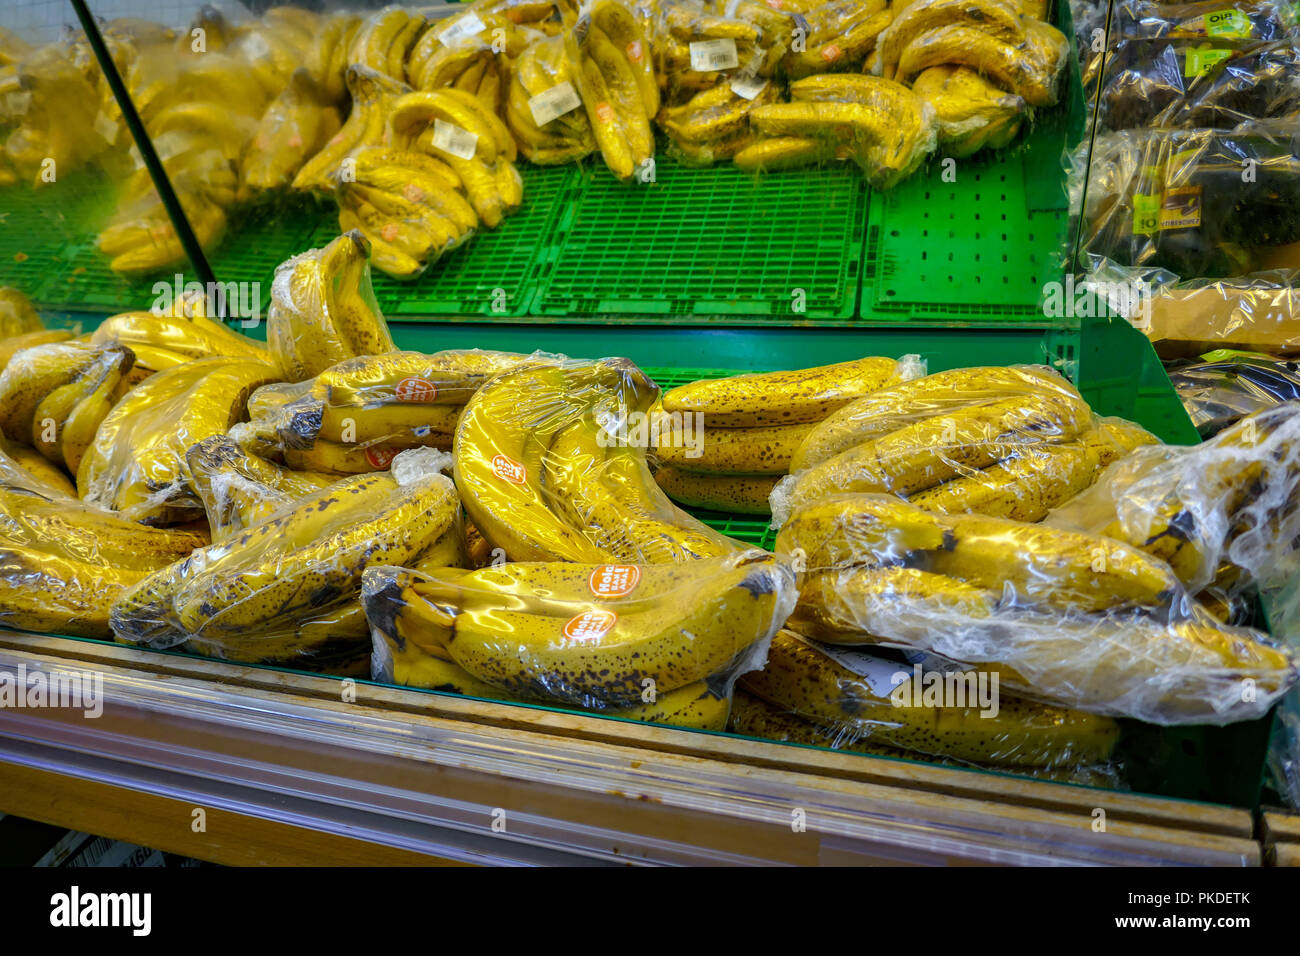 Bananas, Fruit packed in plastic in a French supermarket Stock Photo